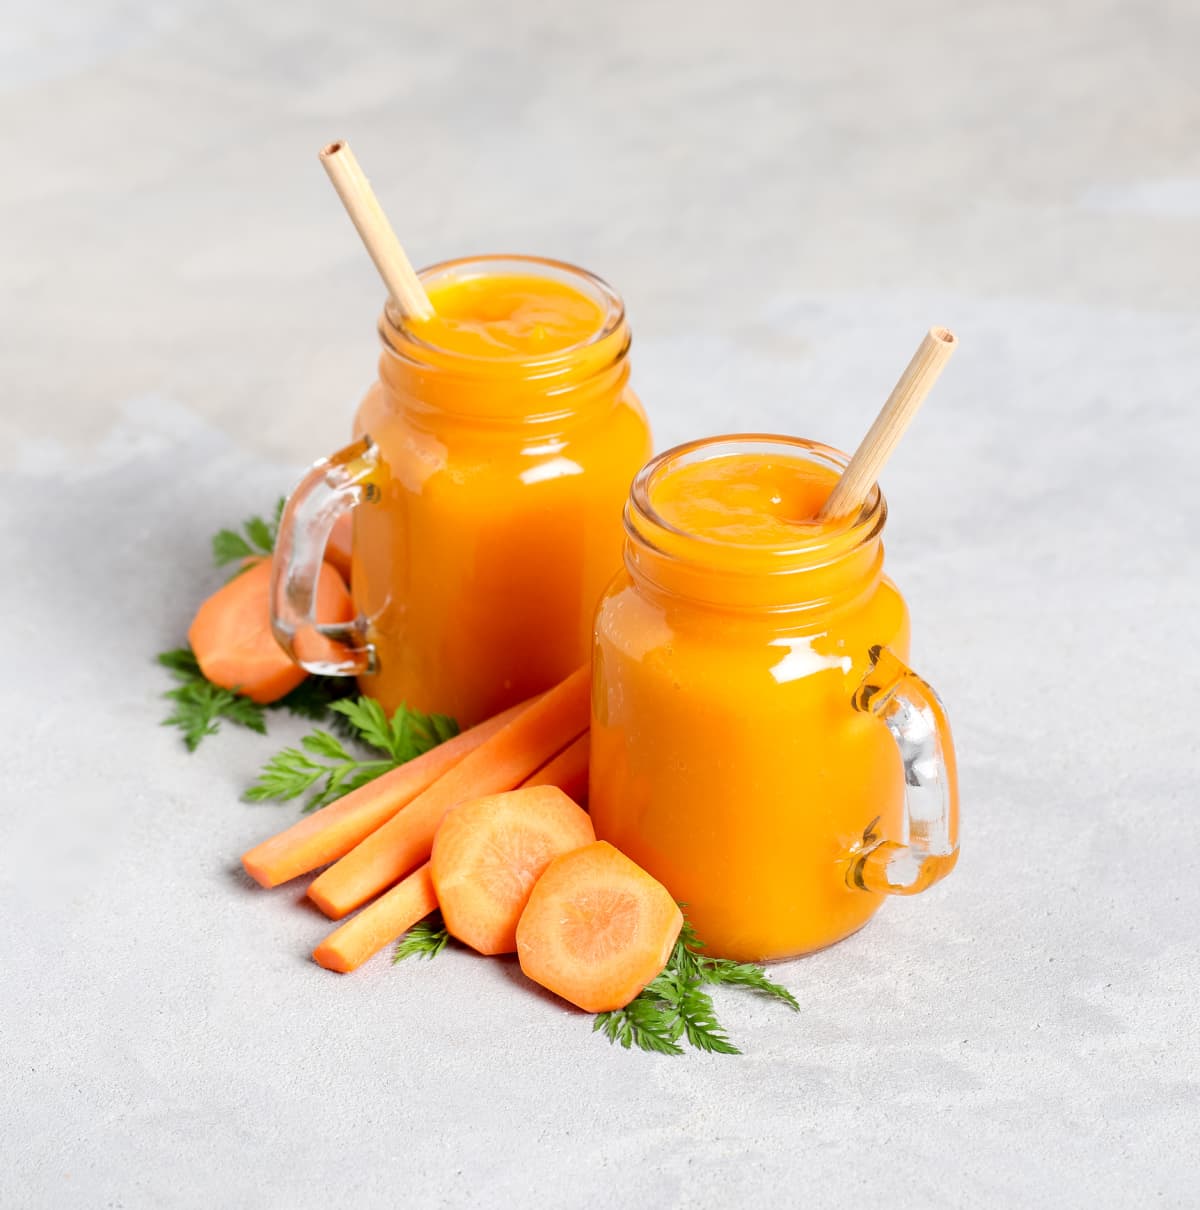 Carrot smoothie in glass jars with a bamboo straws on a light background